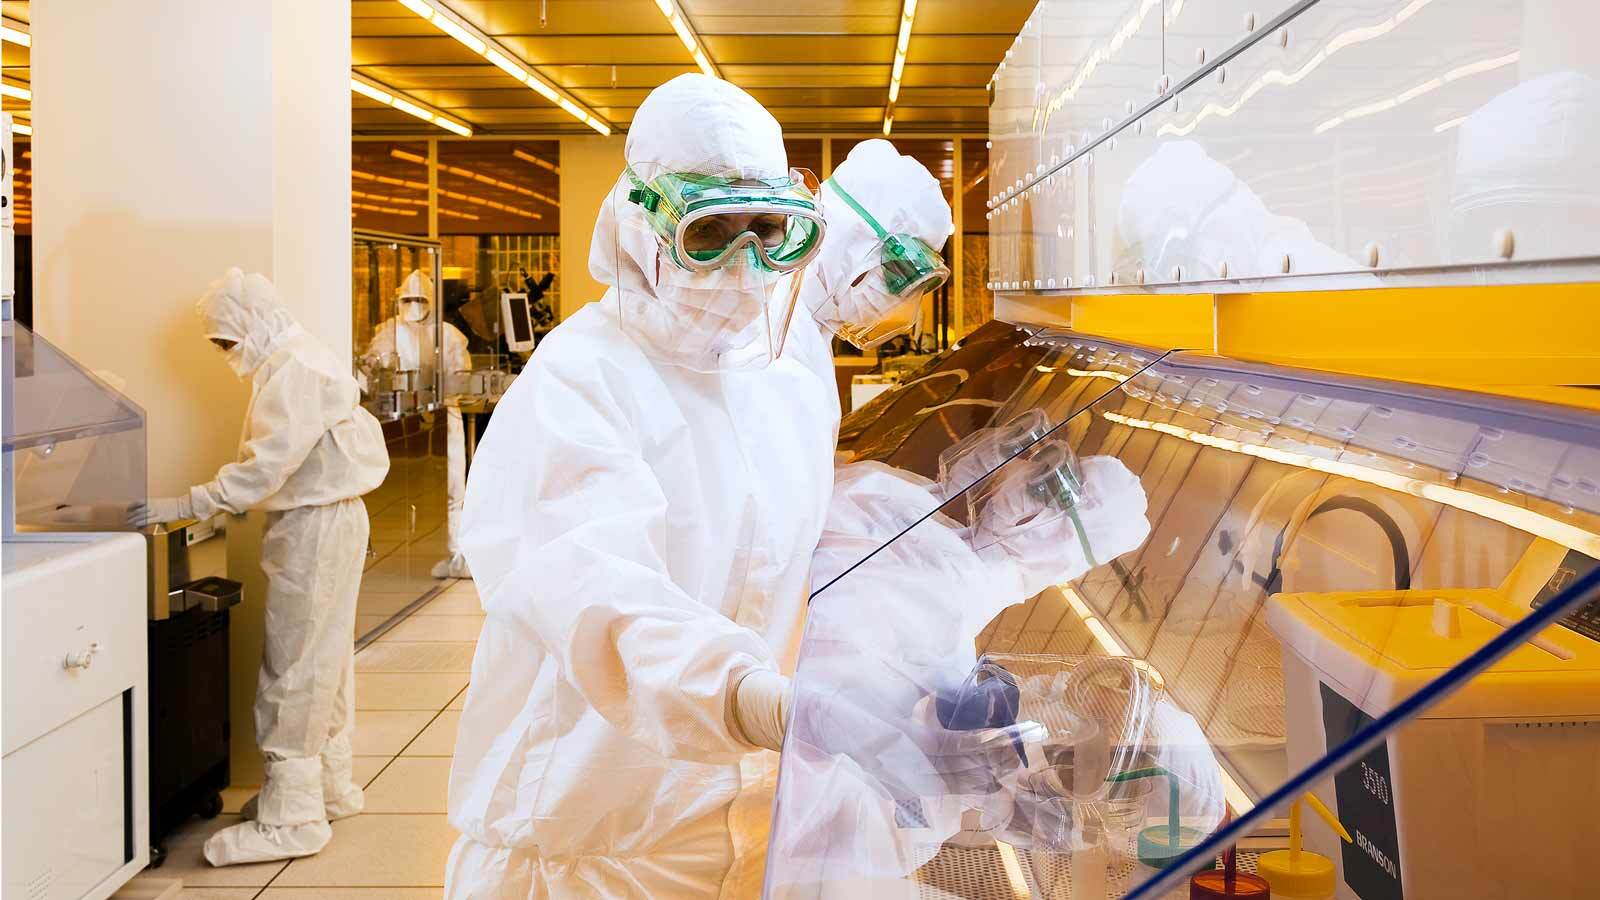 Basic Cleanroom Gowning Procedures